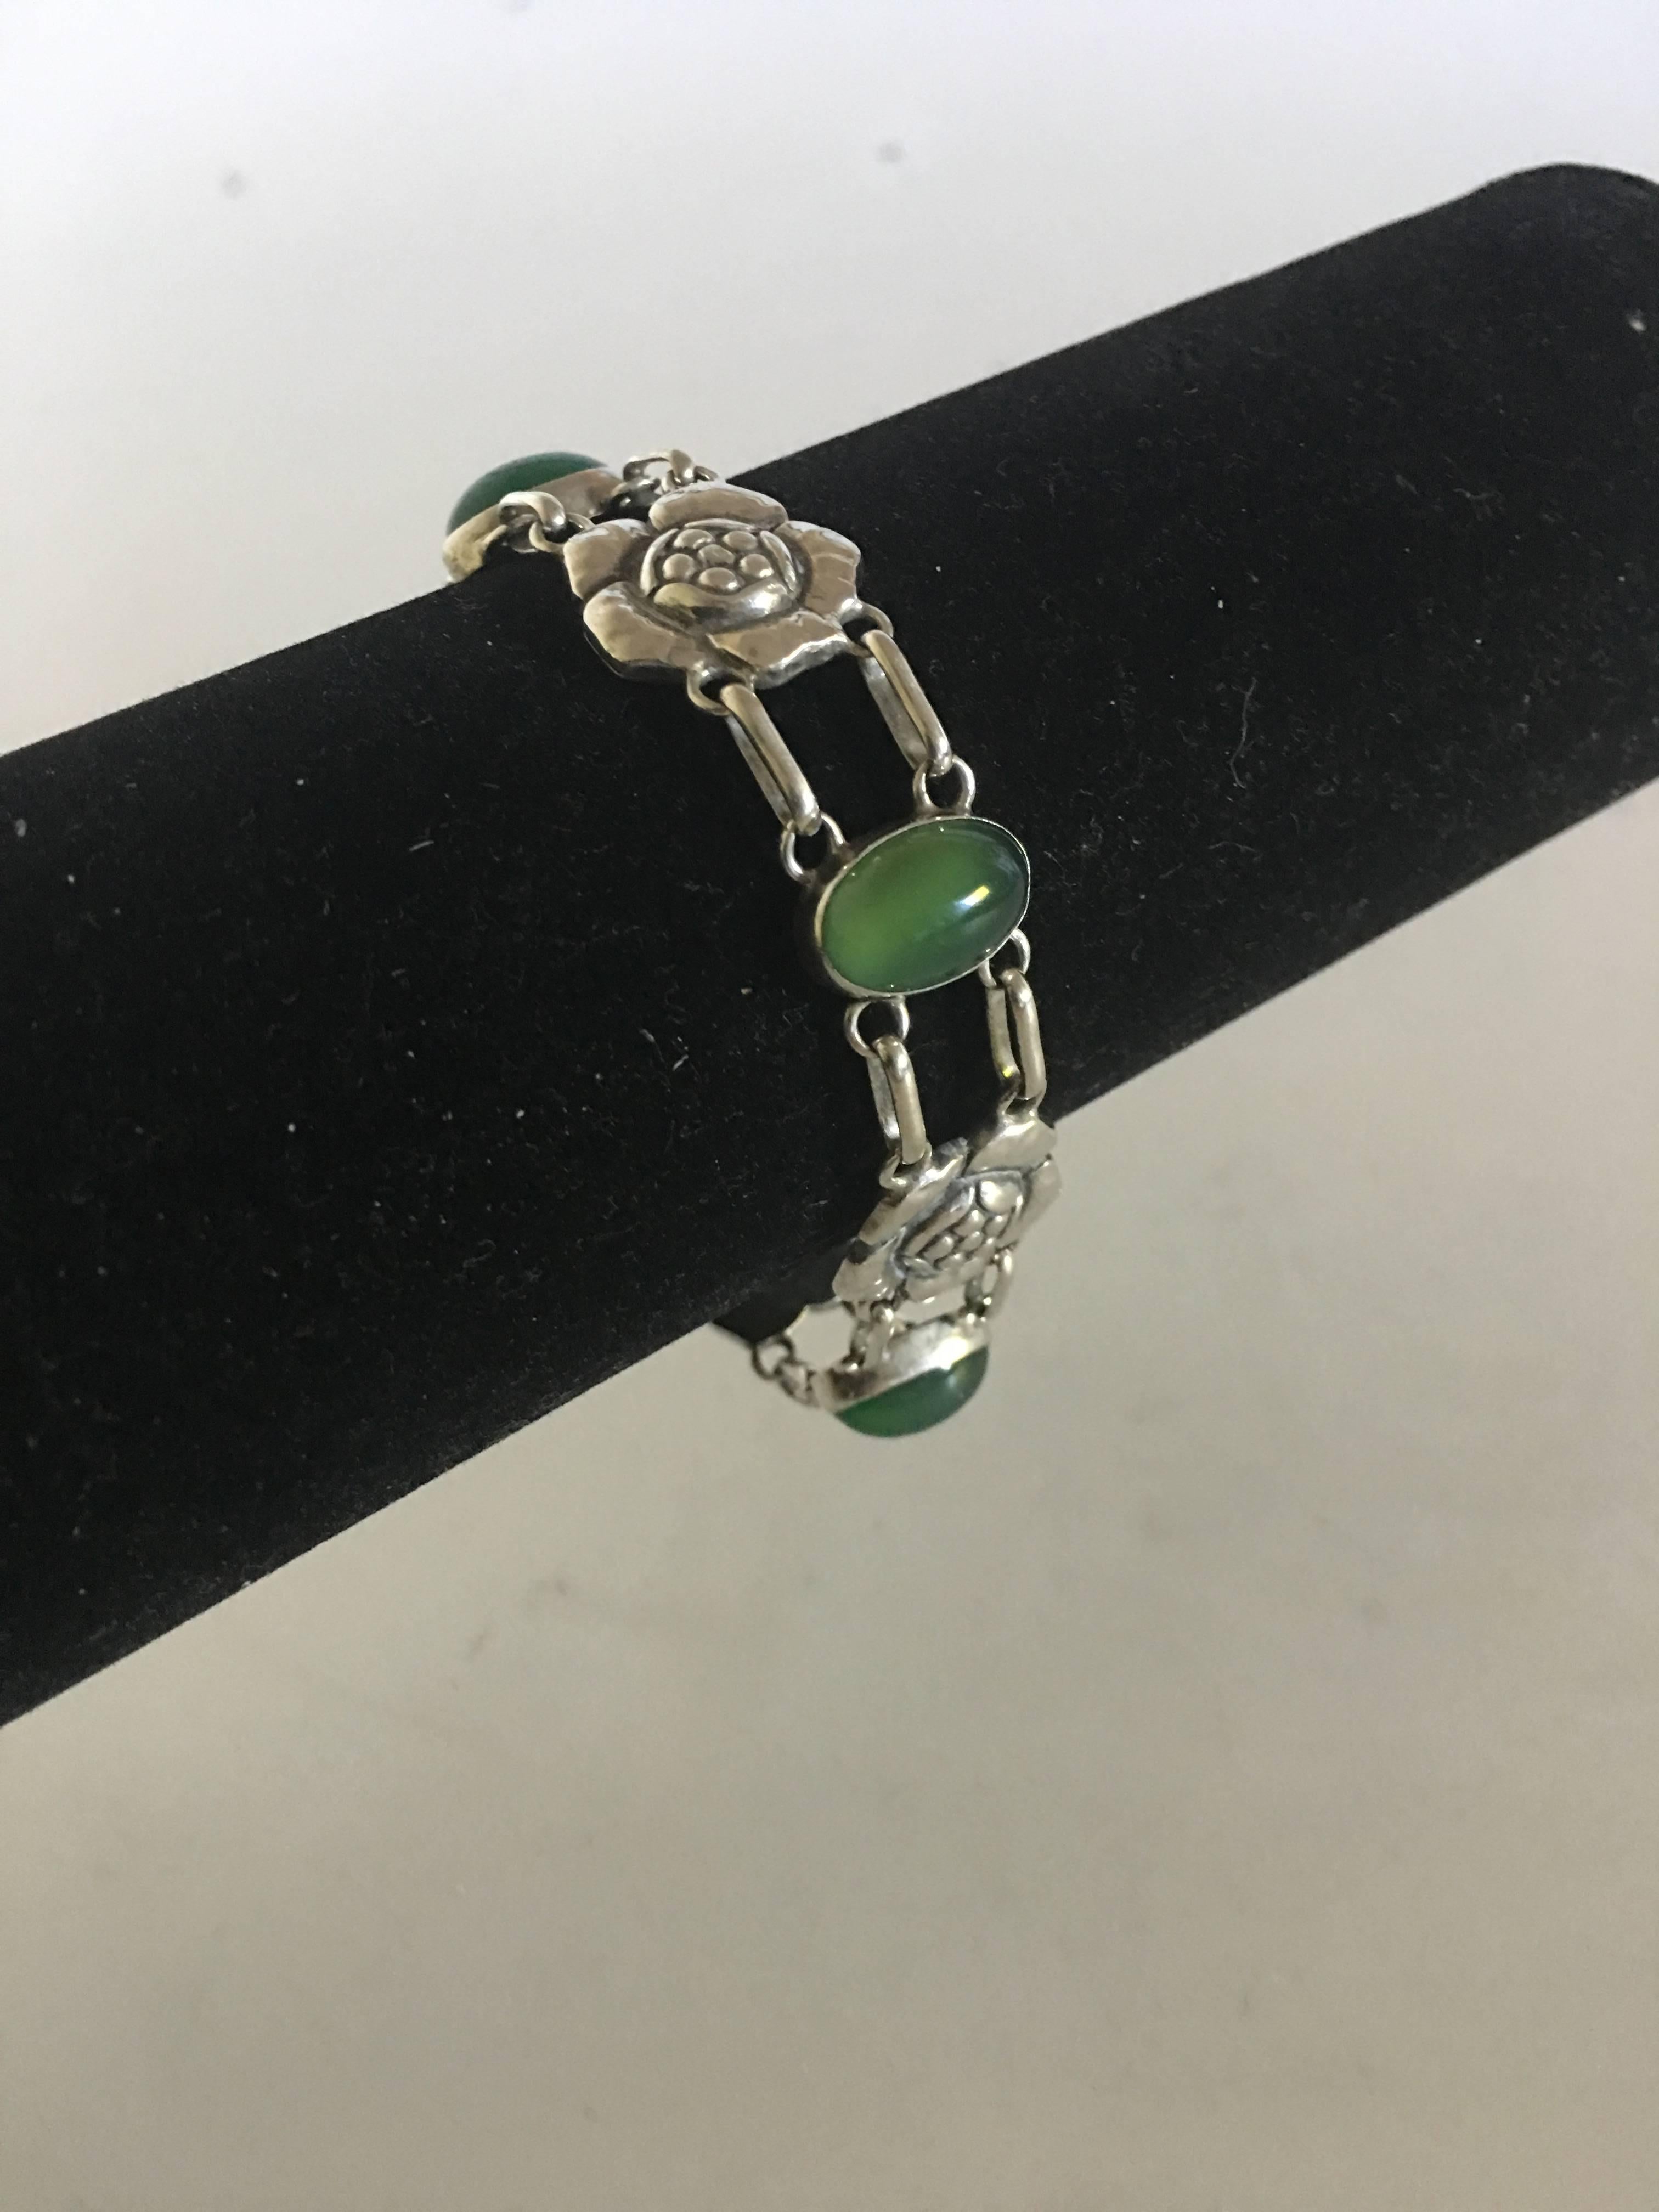 Georg Jensen Silver Bracelet No. 12 with Green Agates. Made around 1919 - 1927. Measures 19.5 cm L (7 43/64